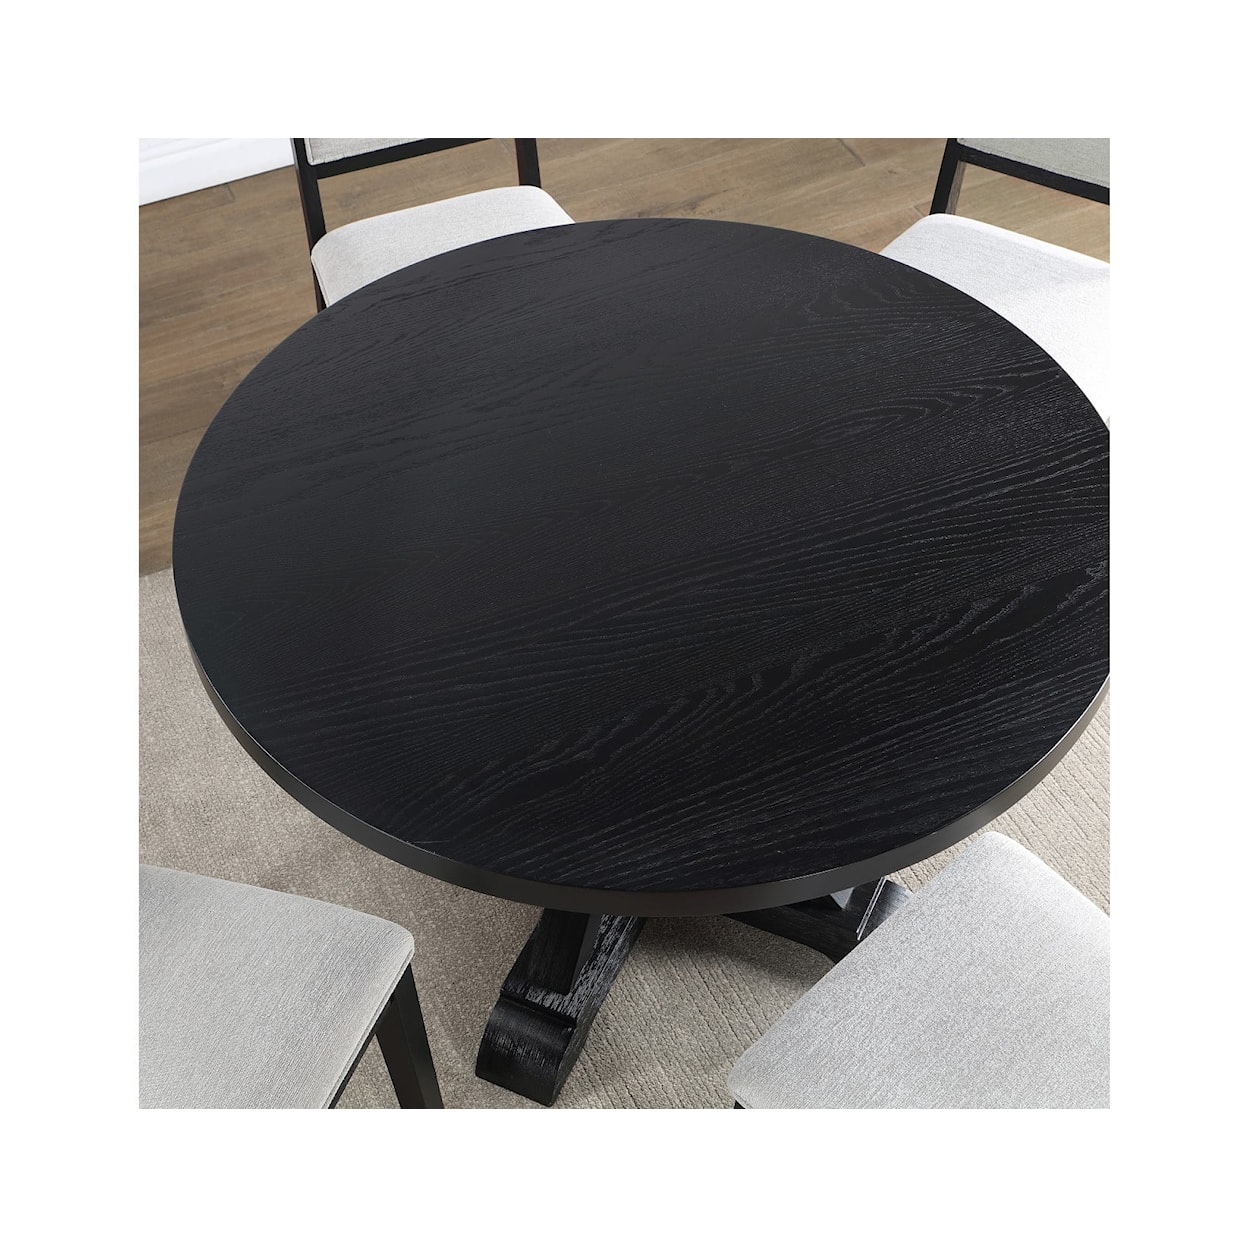 Prime Molly Round Dining Table